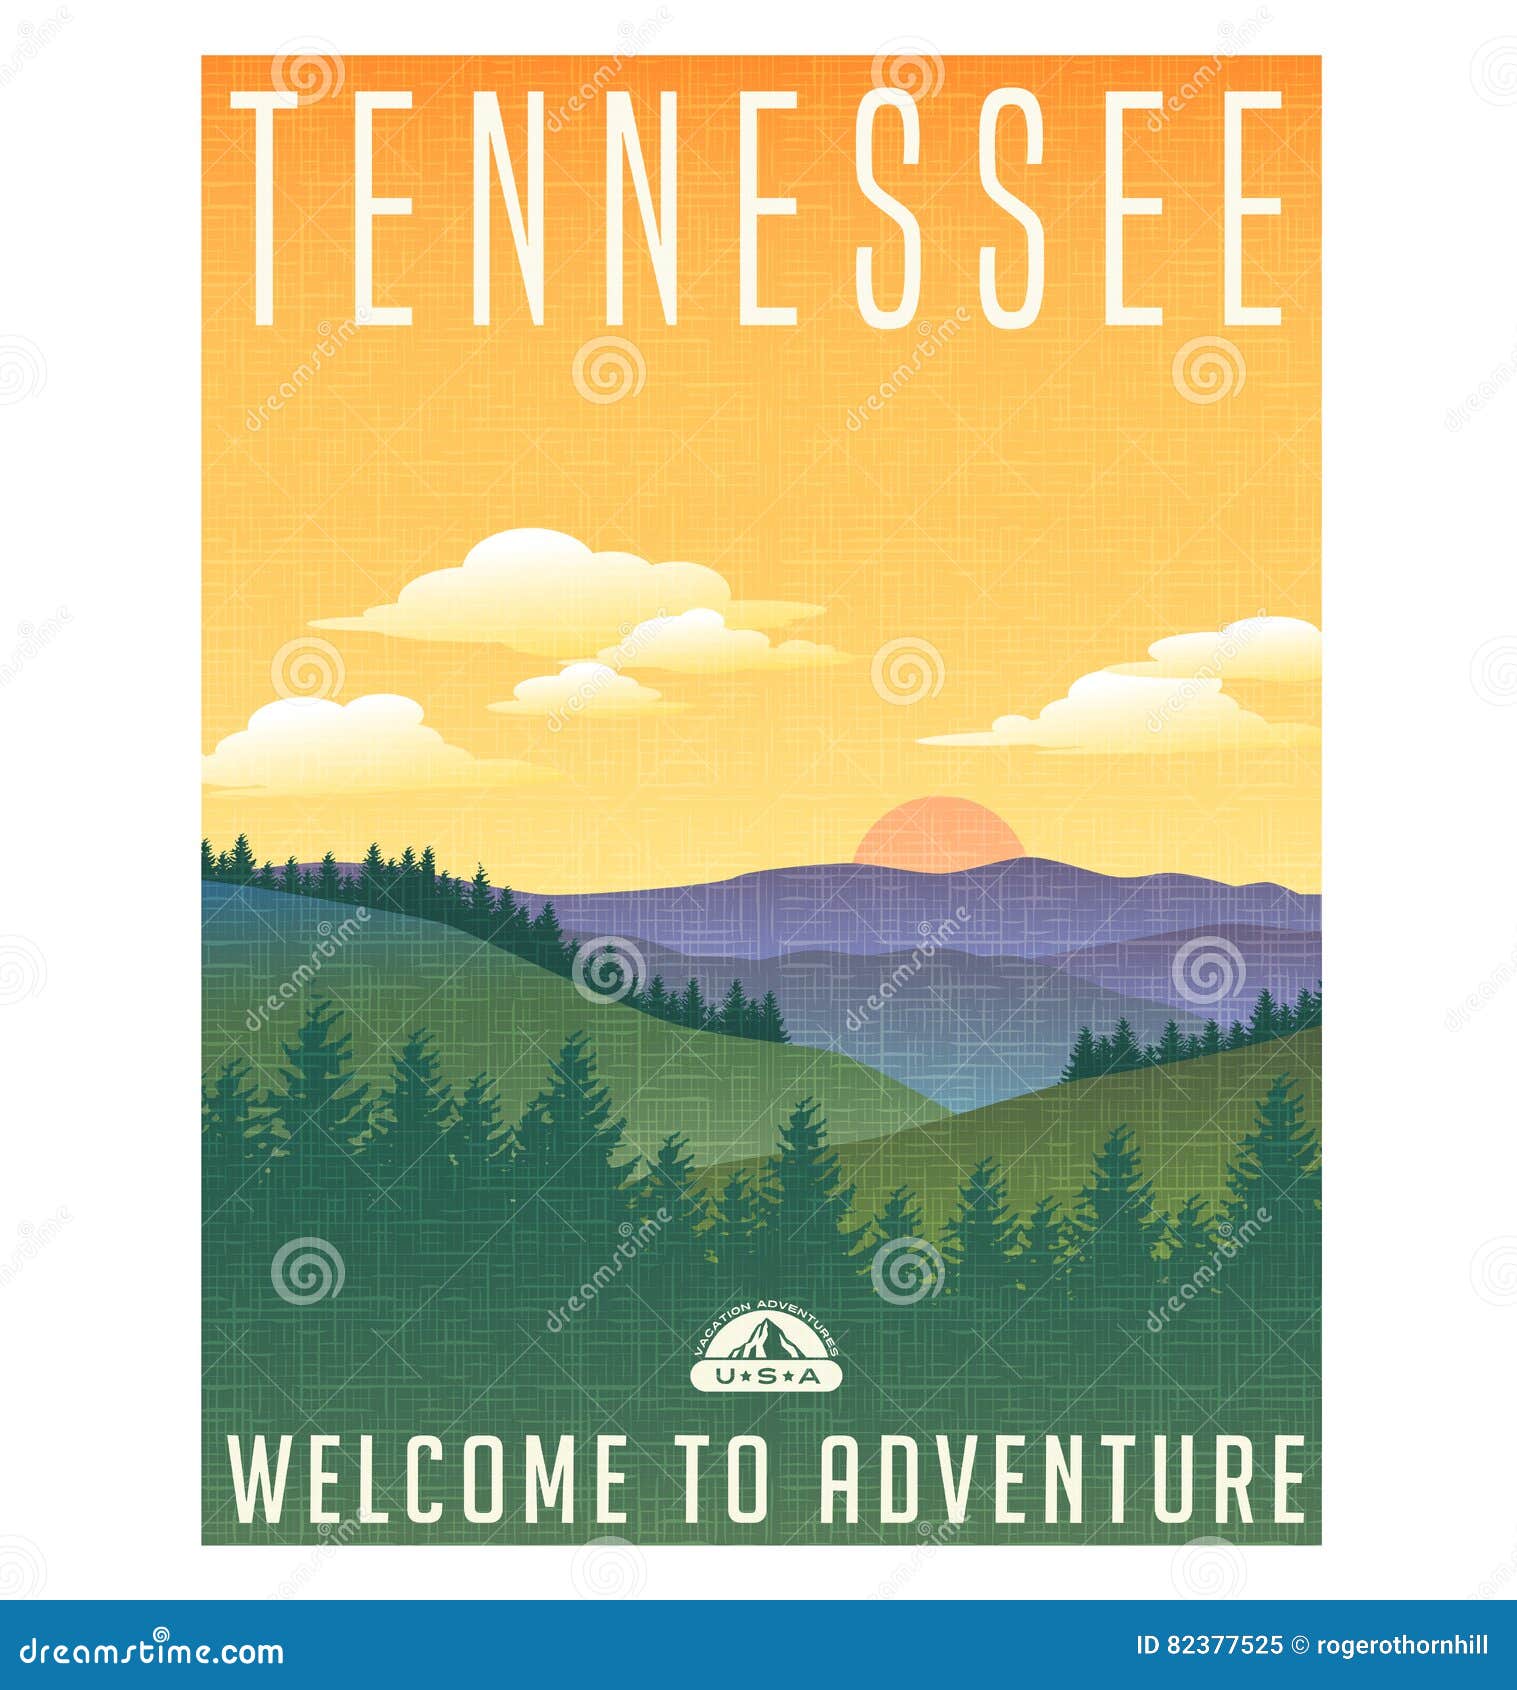 tennessee, united states travel poster